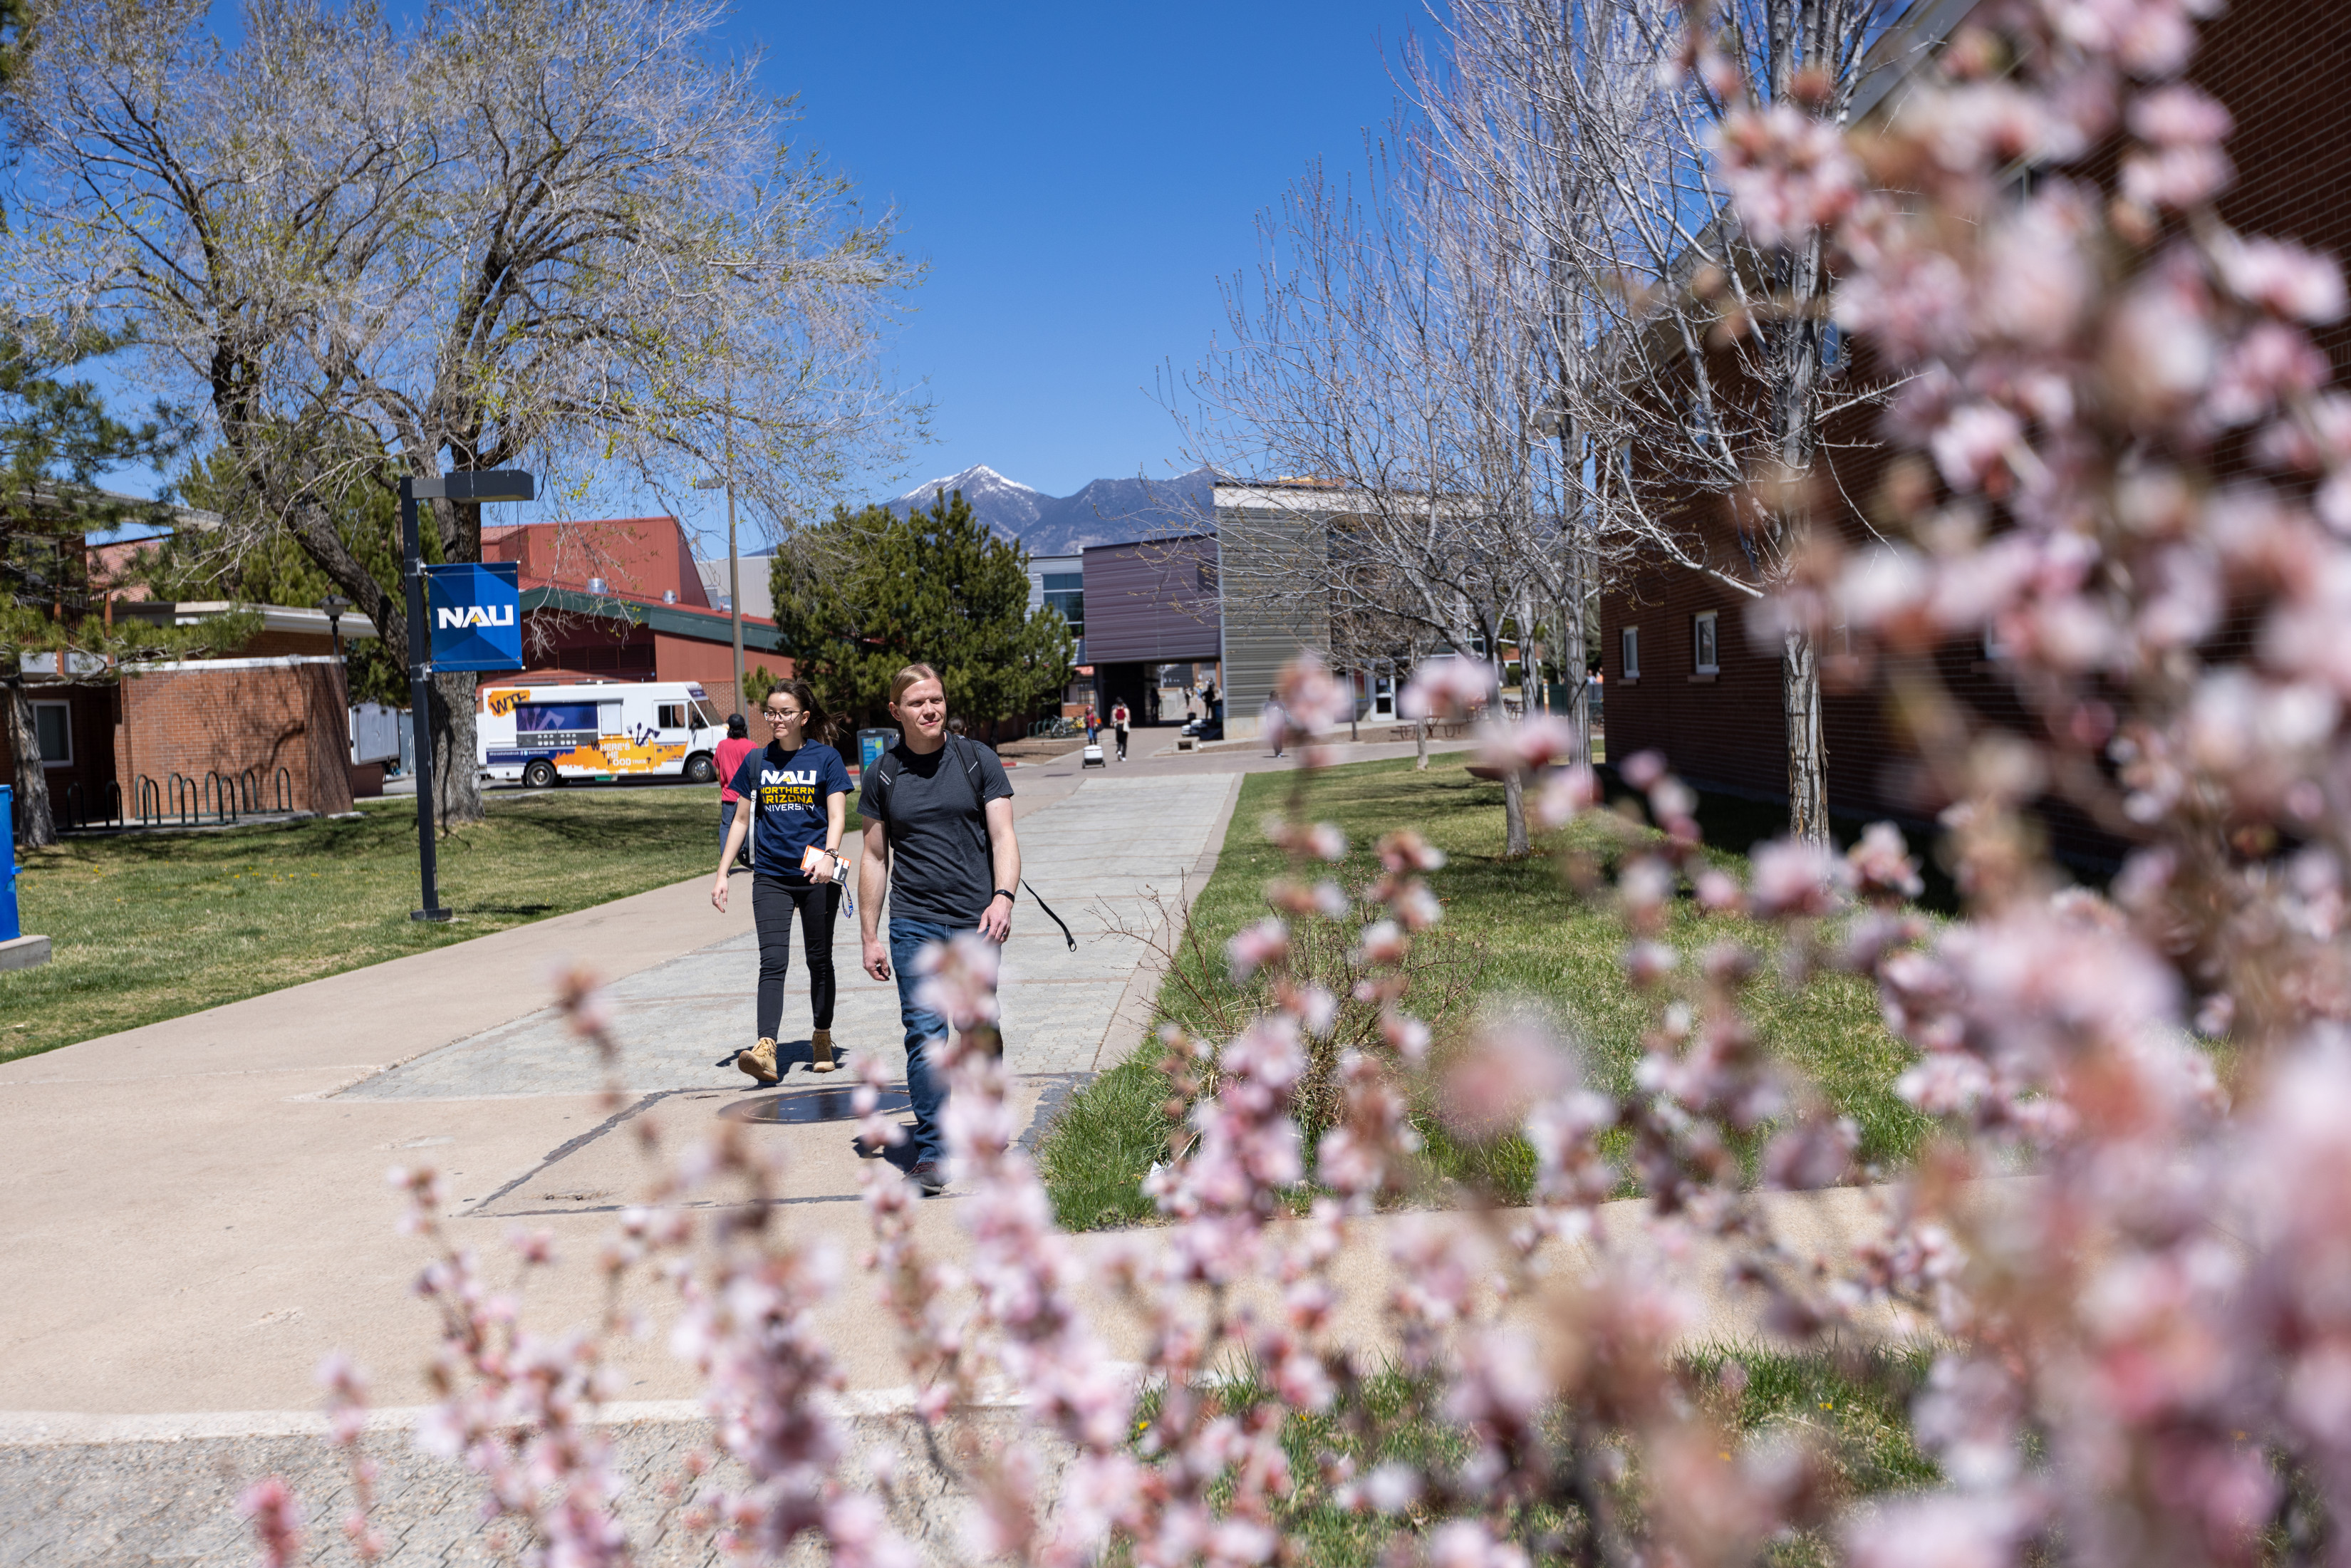 A photo of flowers and students walking.